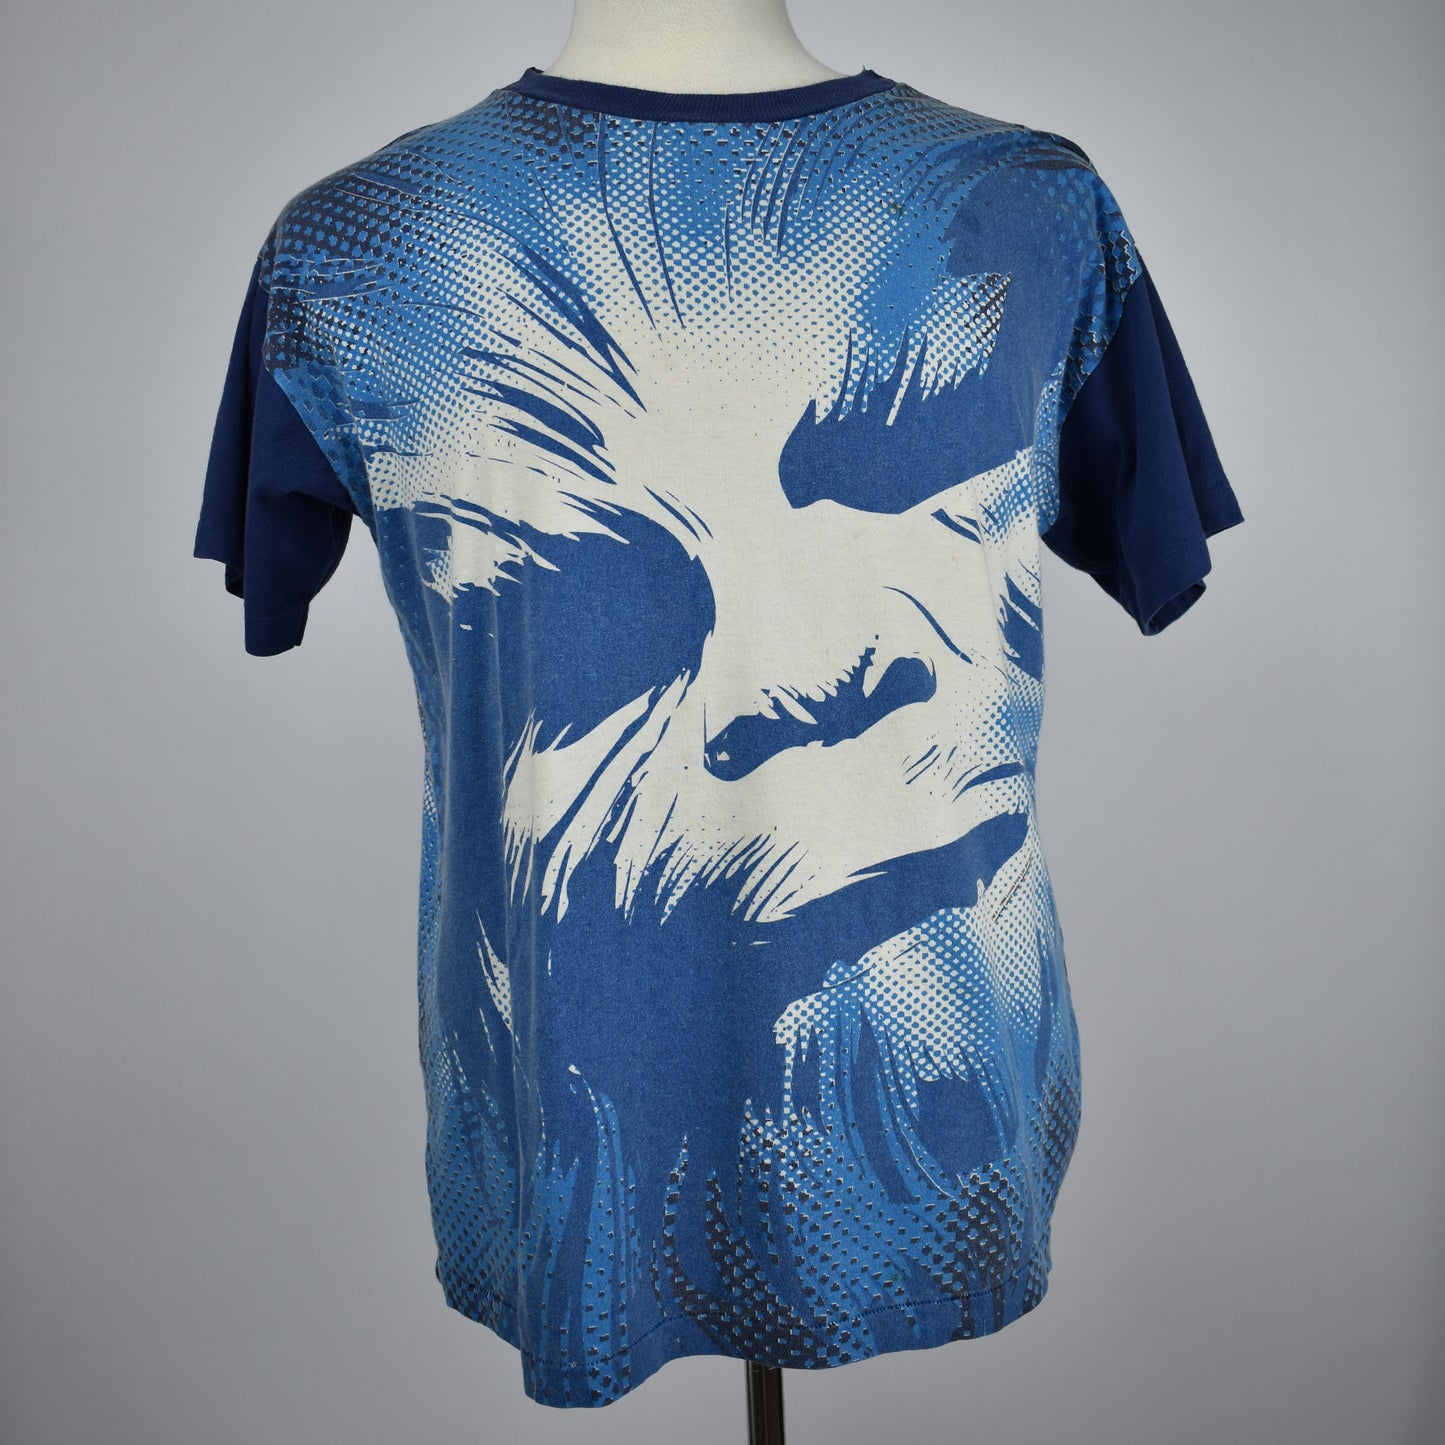 Vintage 90s All Over Print Star Wars Chewbacca I'd Rather Kiss A Wookie Single Stitch T-Shirt